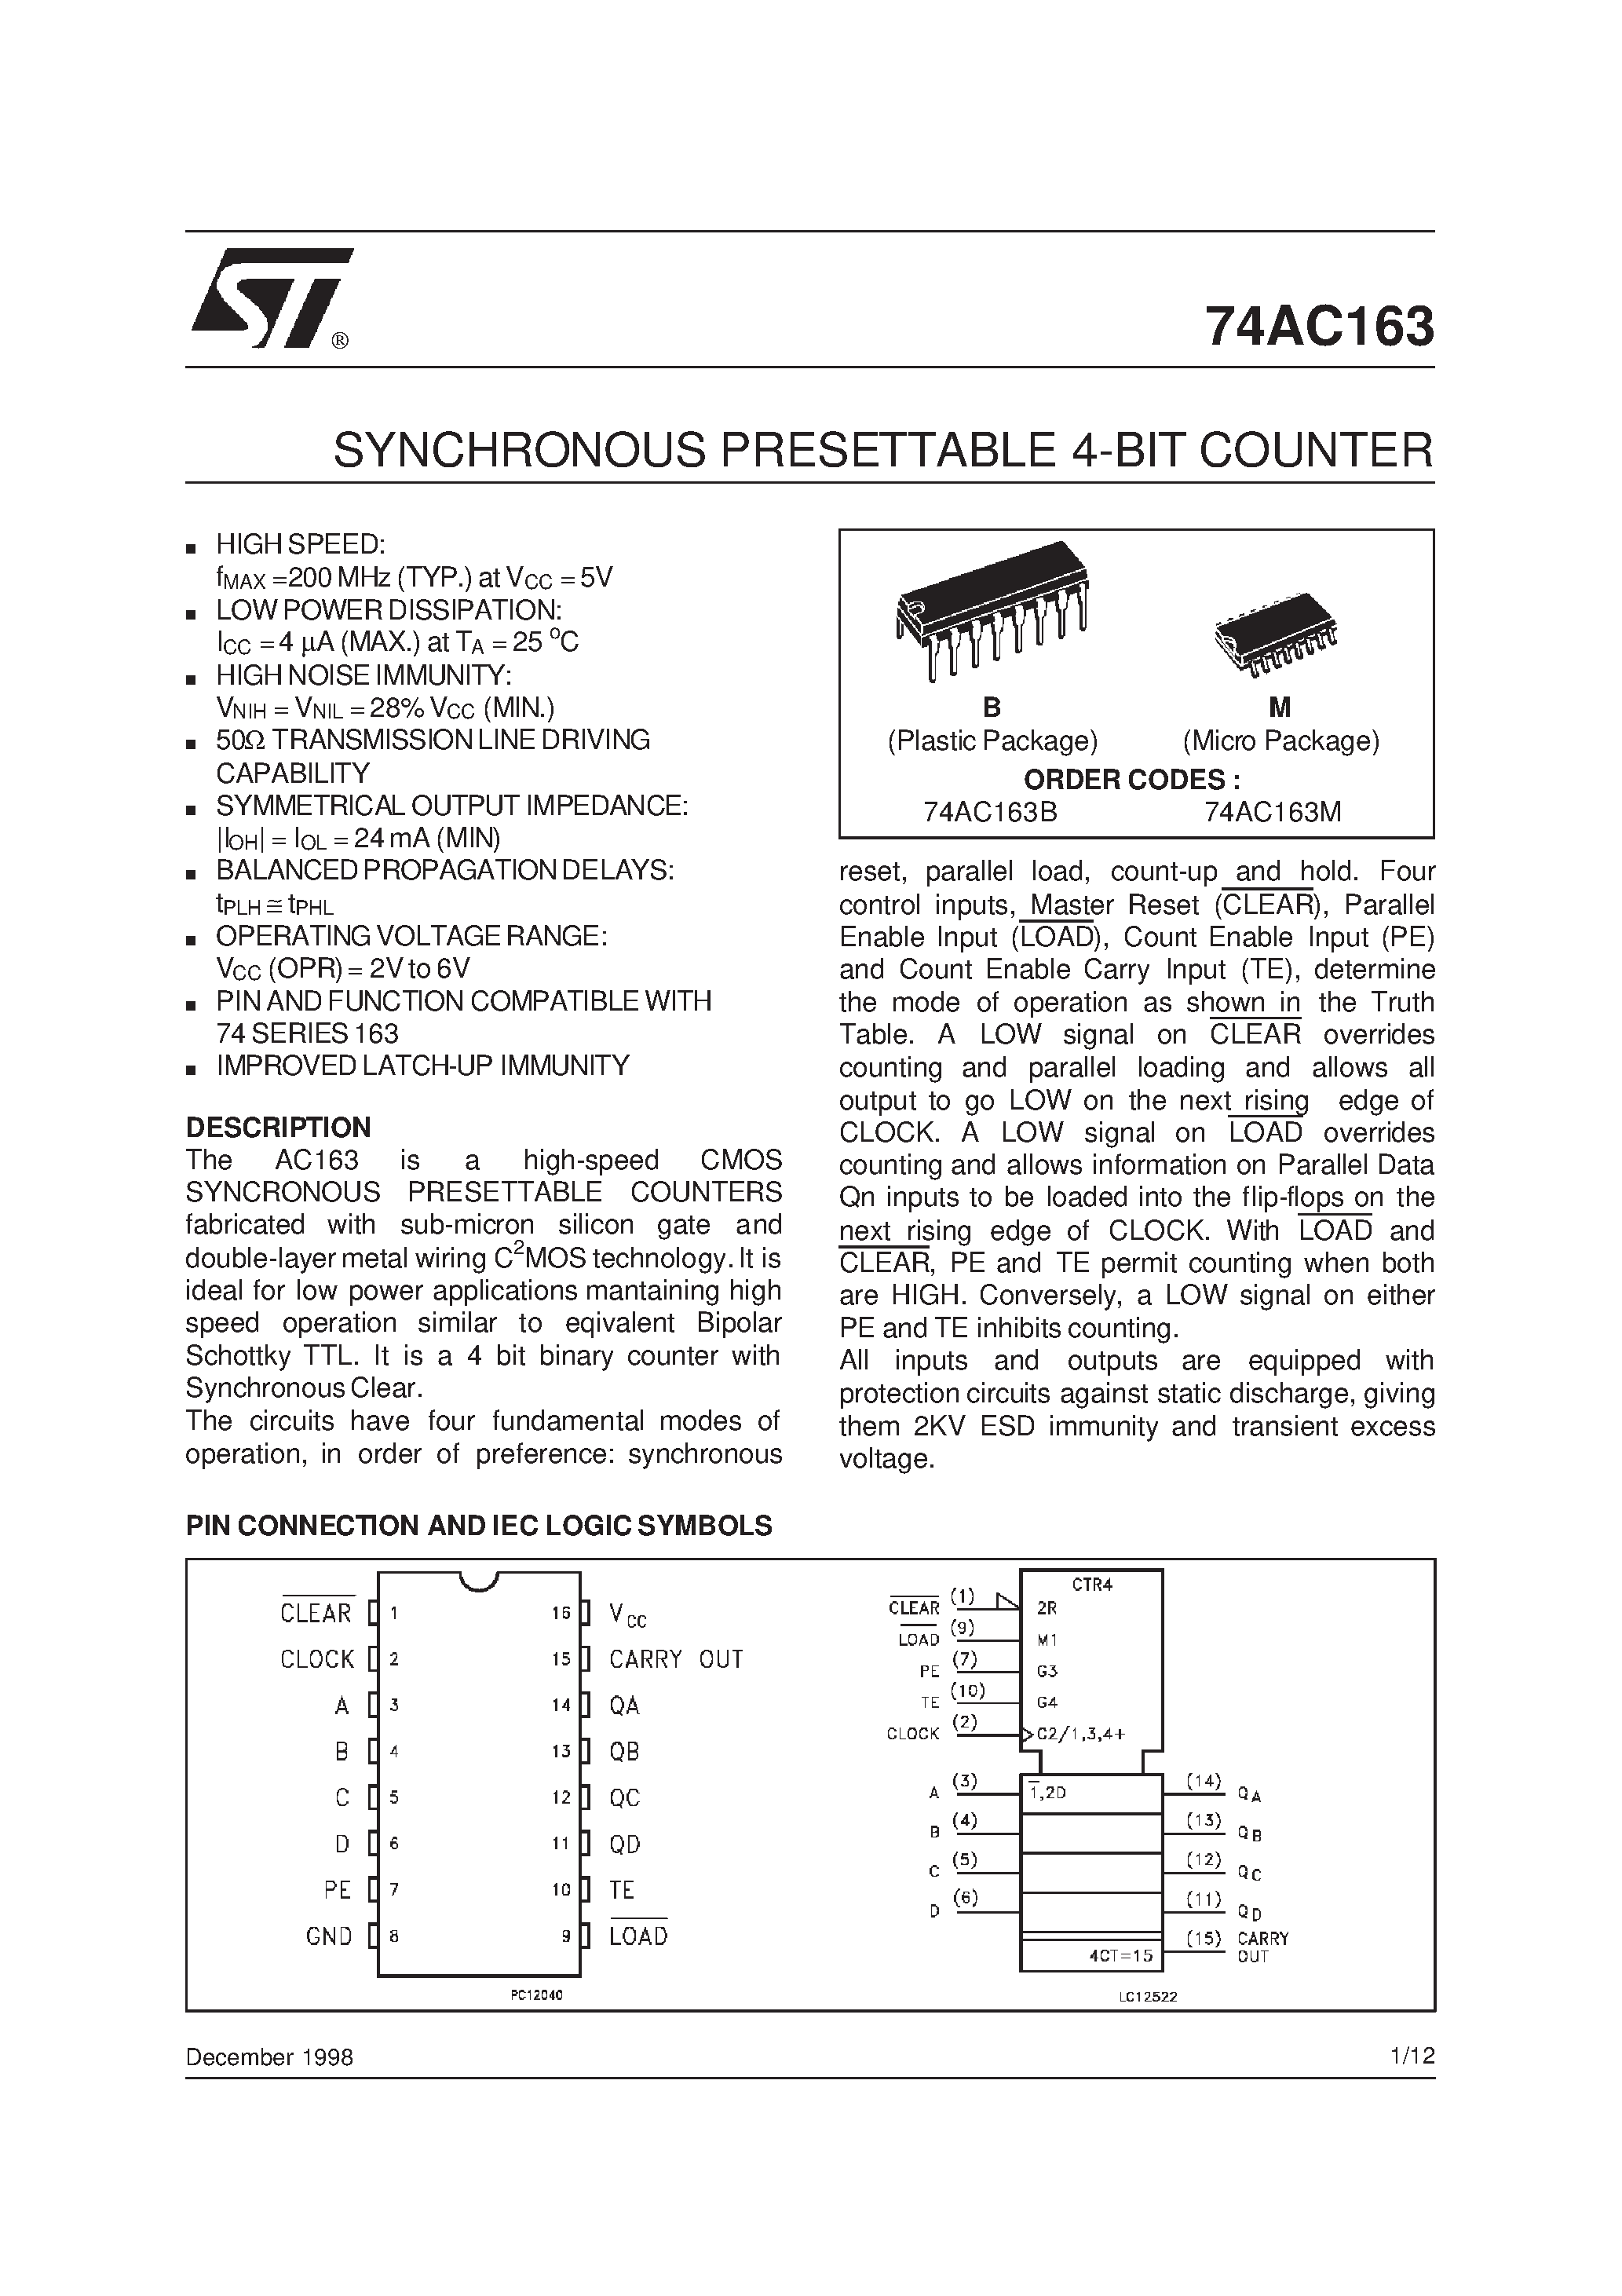 Даташит 74AC163 - Synchronous Presettable Binary Counter страница 1